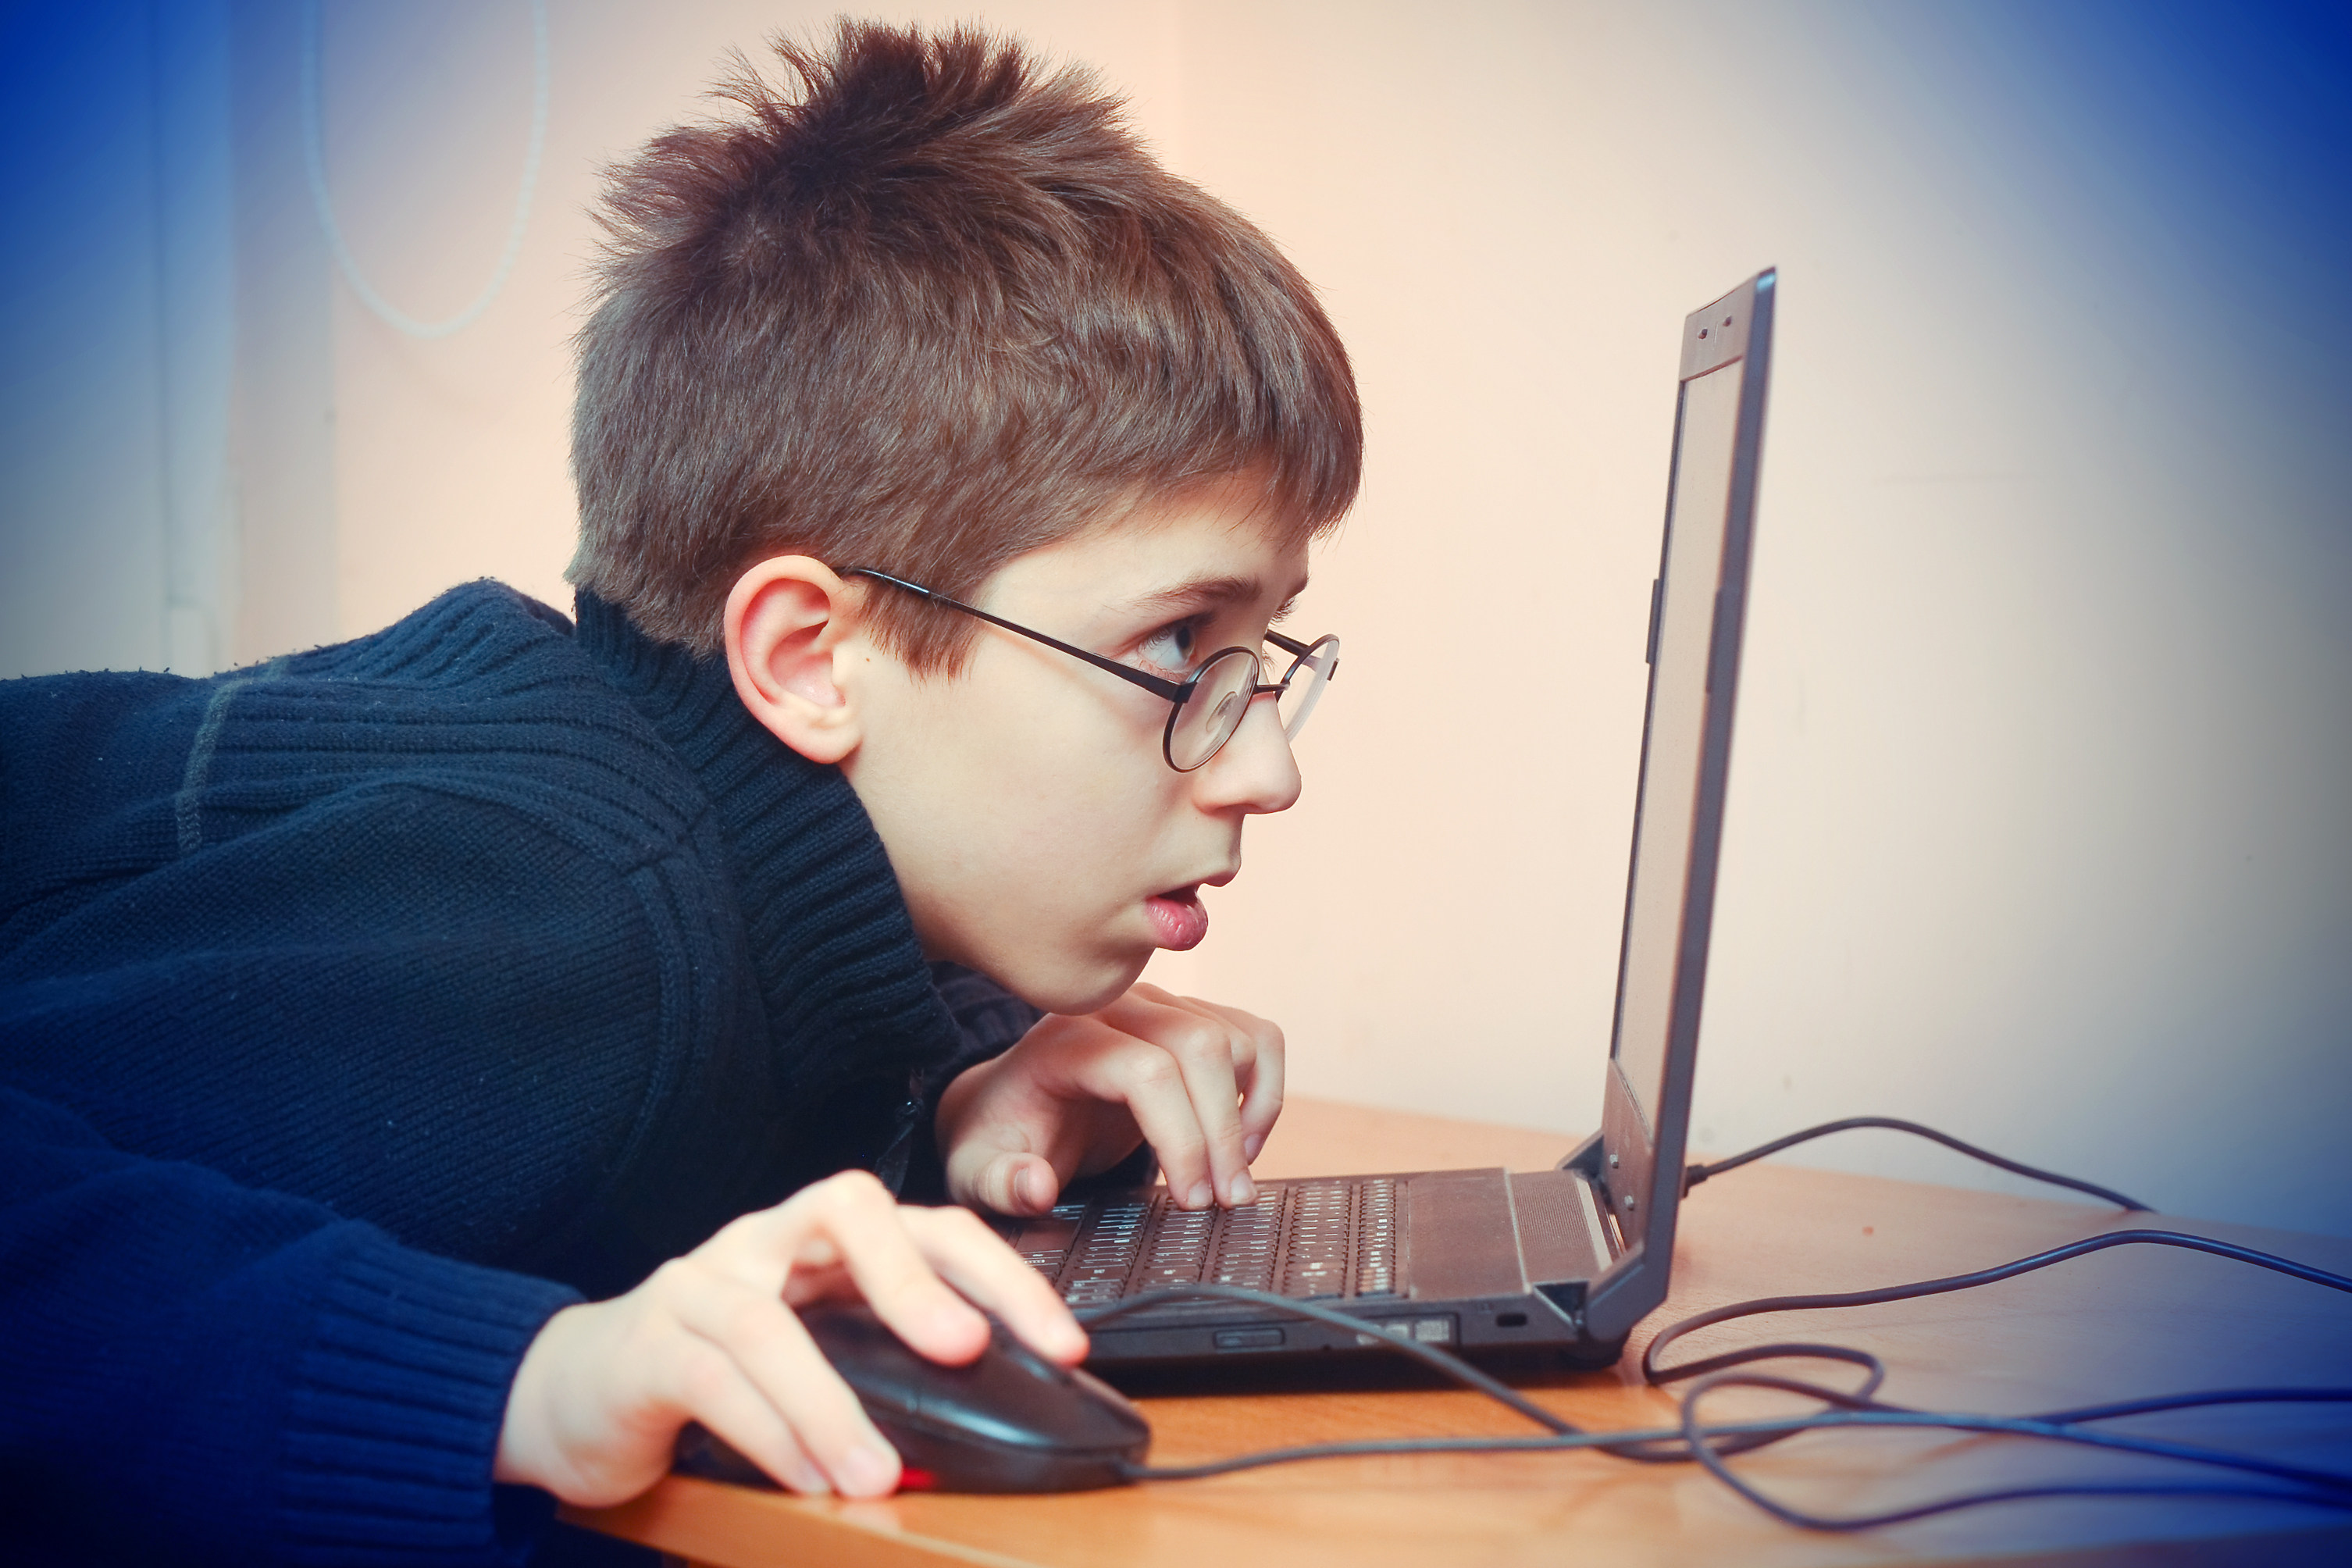 Children and adults find it hard to tear themselves away from gaming, streaming, social media or chatting online. Photo: Shutterstock